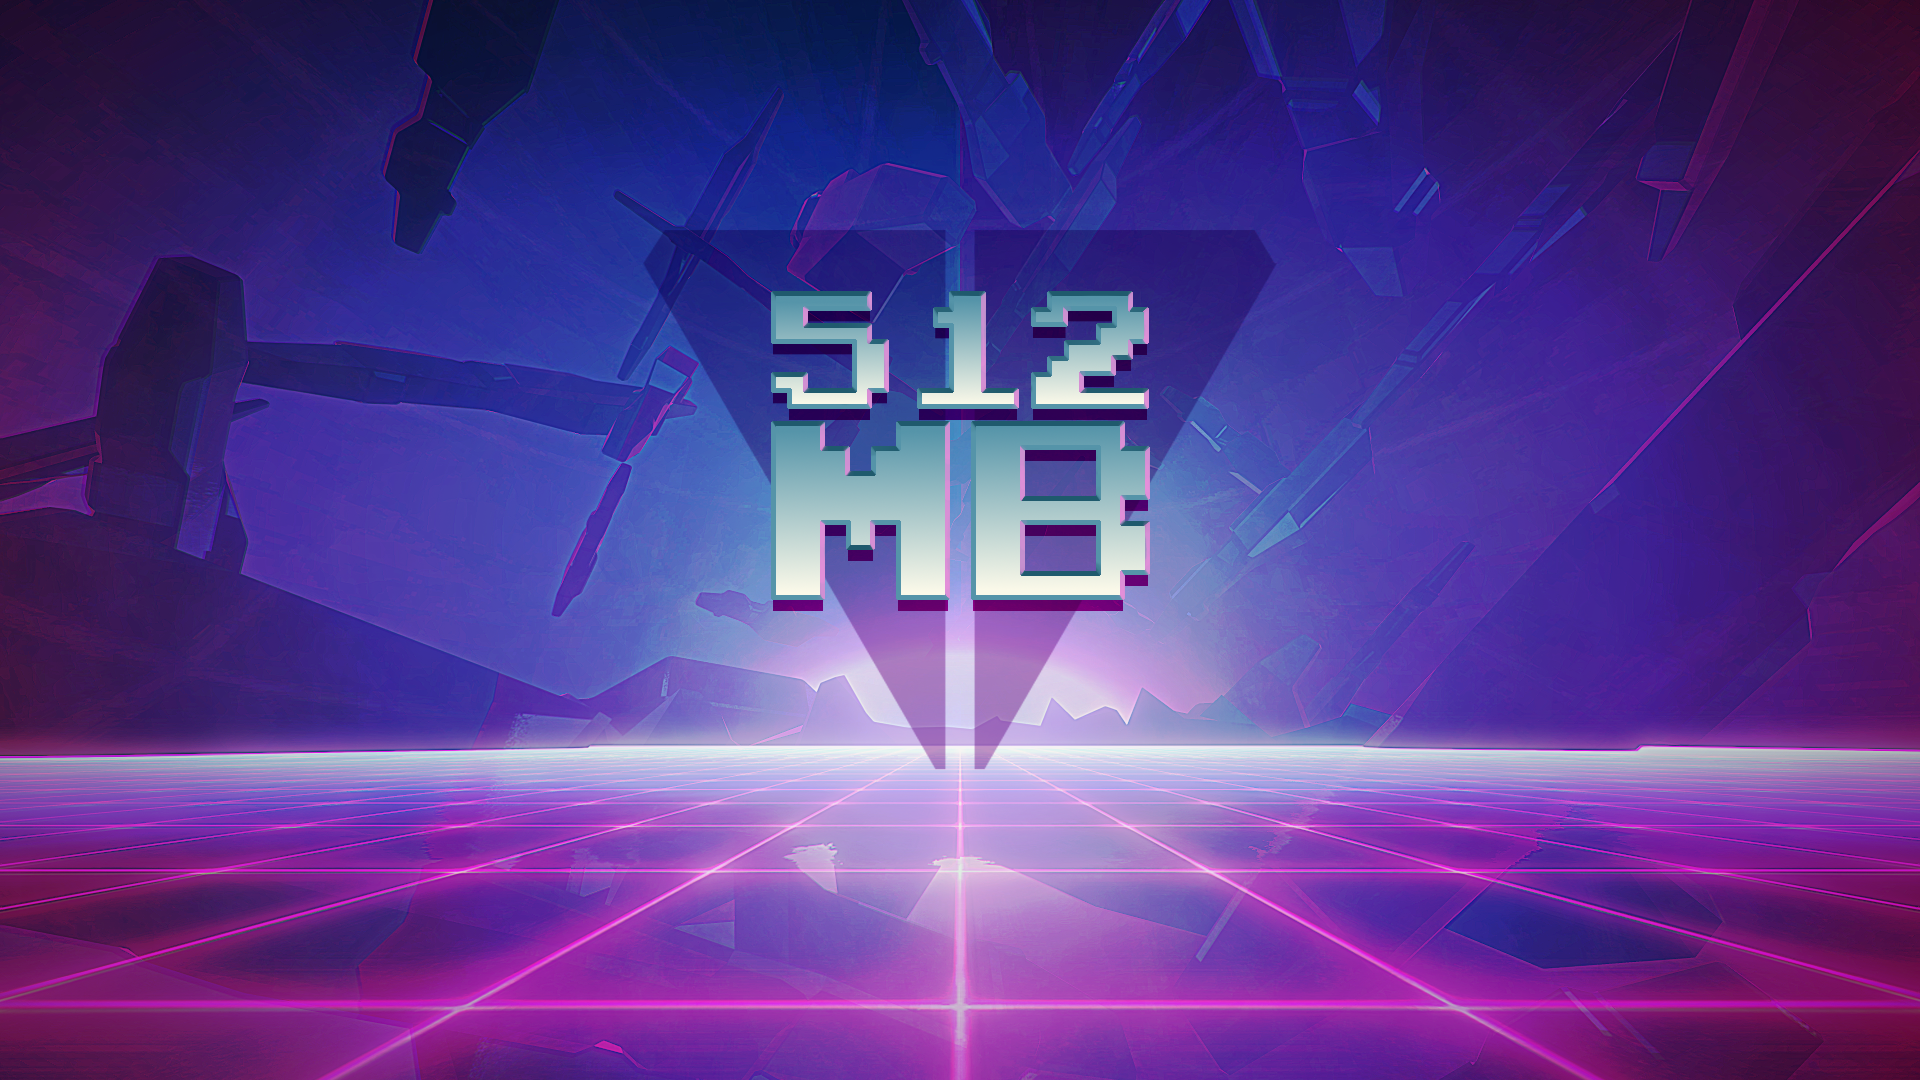 Icon for 512 MB